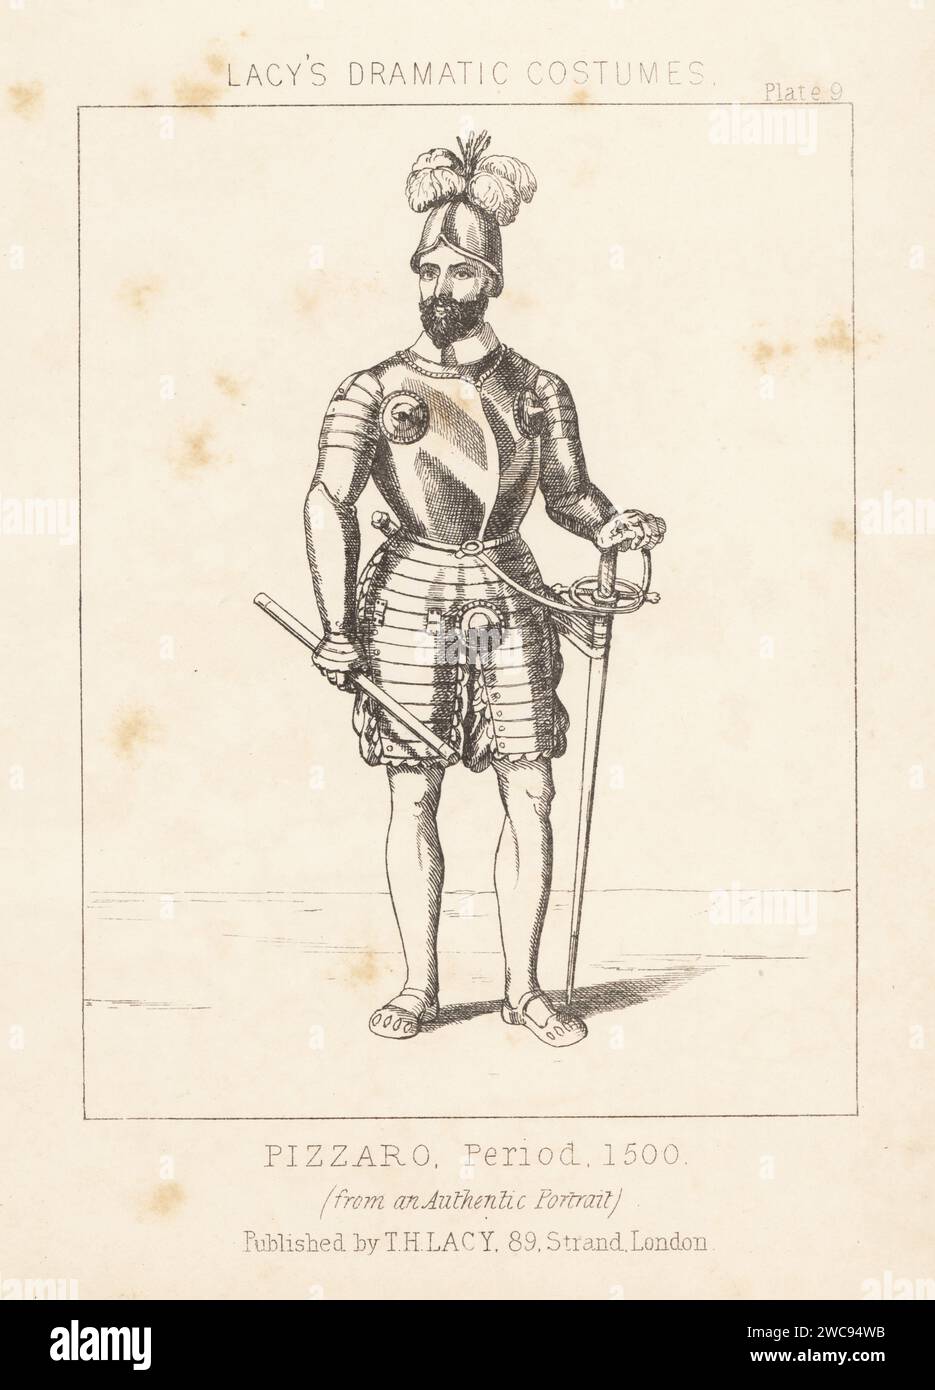 Francisco Pizarro, Marquess of the Atabillos, Spanish conquistador, c.1478-1541. In plumed helmet, plate armour, hose, gauntlets, with cane and sword. Pizzaro (sic), period 1500. From an authentic portrait. Lithograph from Thomas Hailes Lacy's Male Costumes, Historical, National and Dramatic in 200 Plates, London, 1865. Lacy (1809-1873) was a British actor, playwright, theatrical manager and publisher. Stock Photo